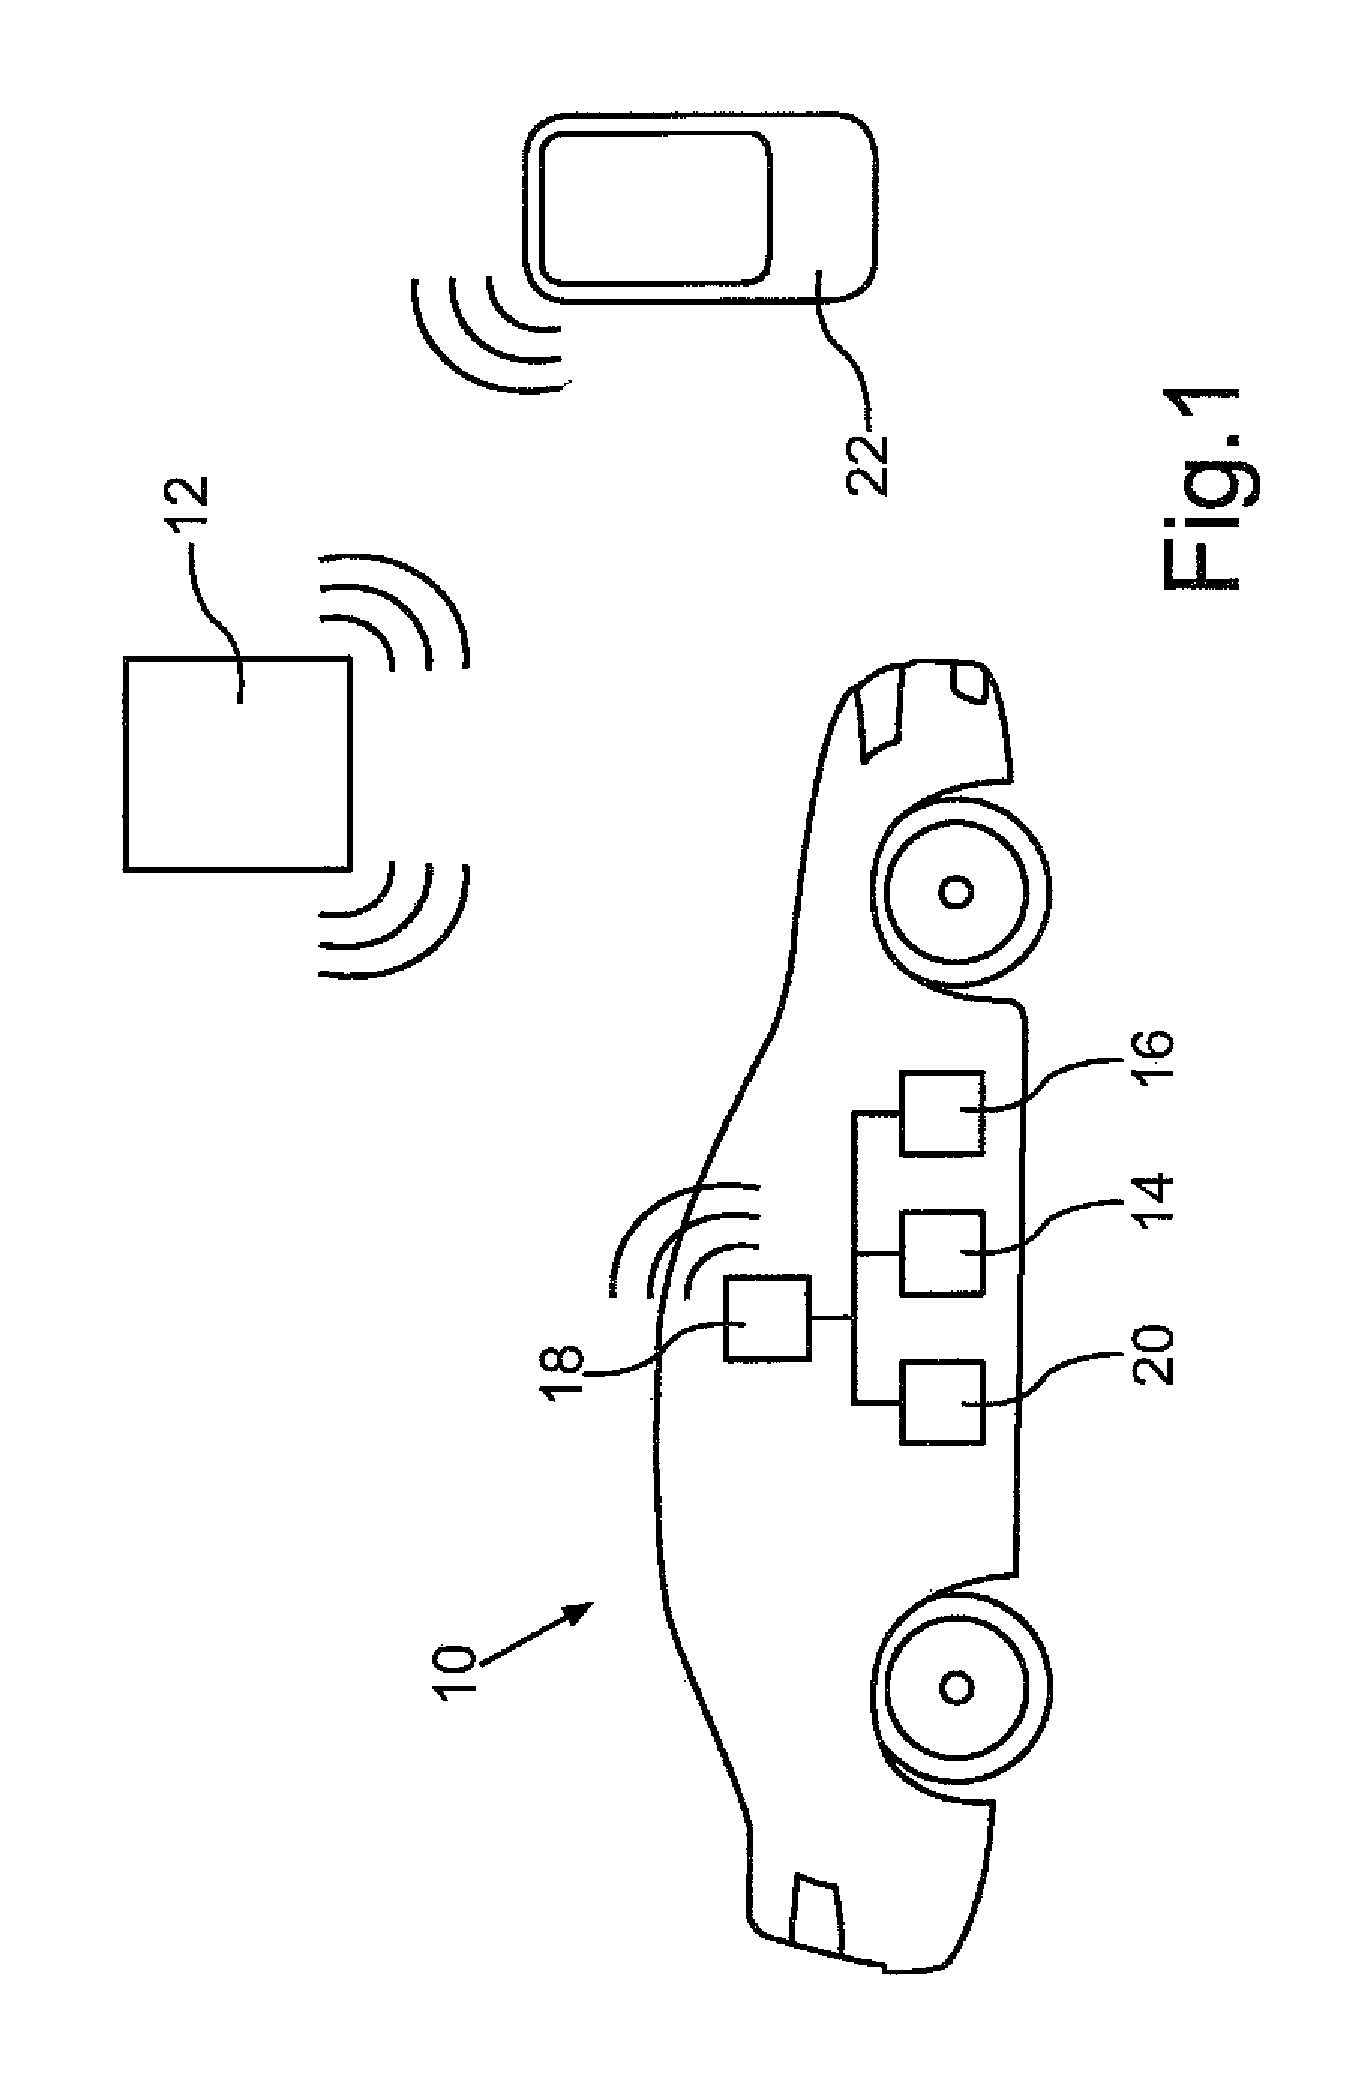 Method for making available at least one position information item about a parked motor vehicle and motor vehicle